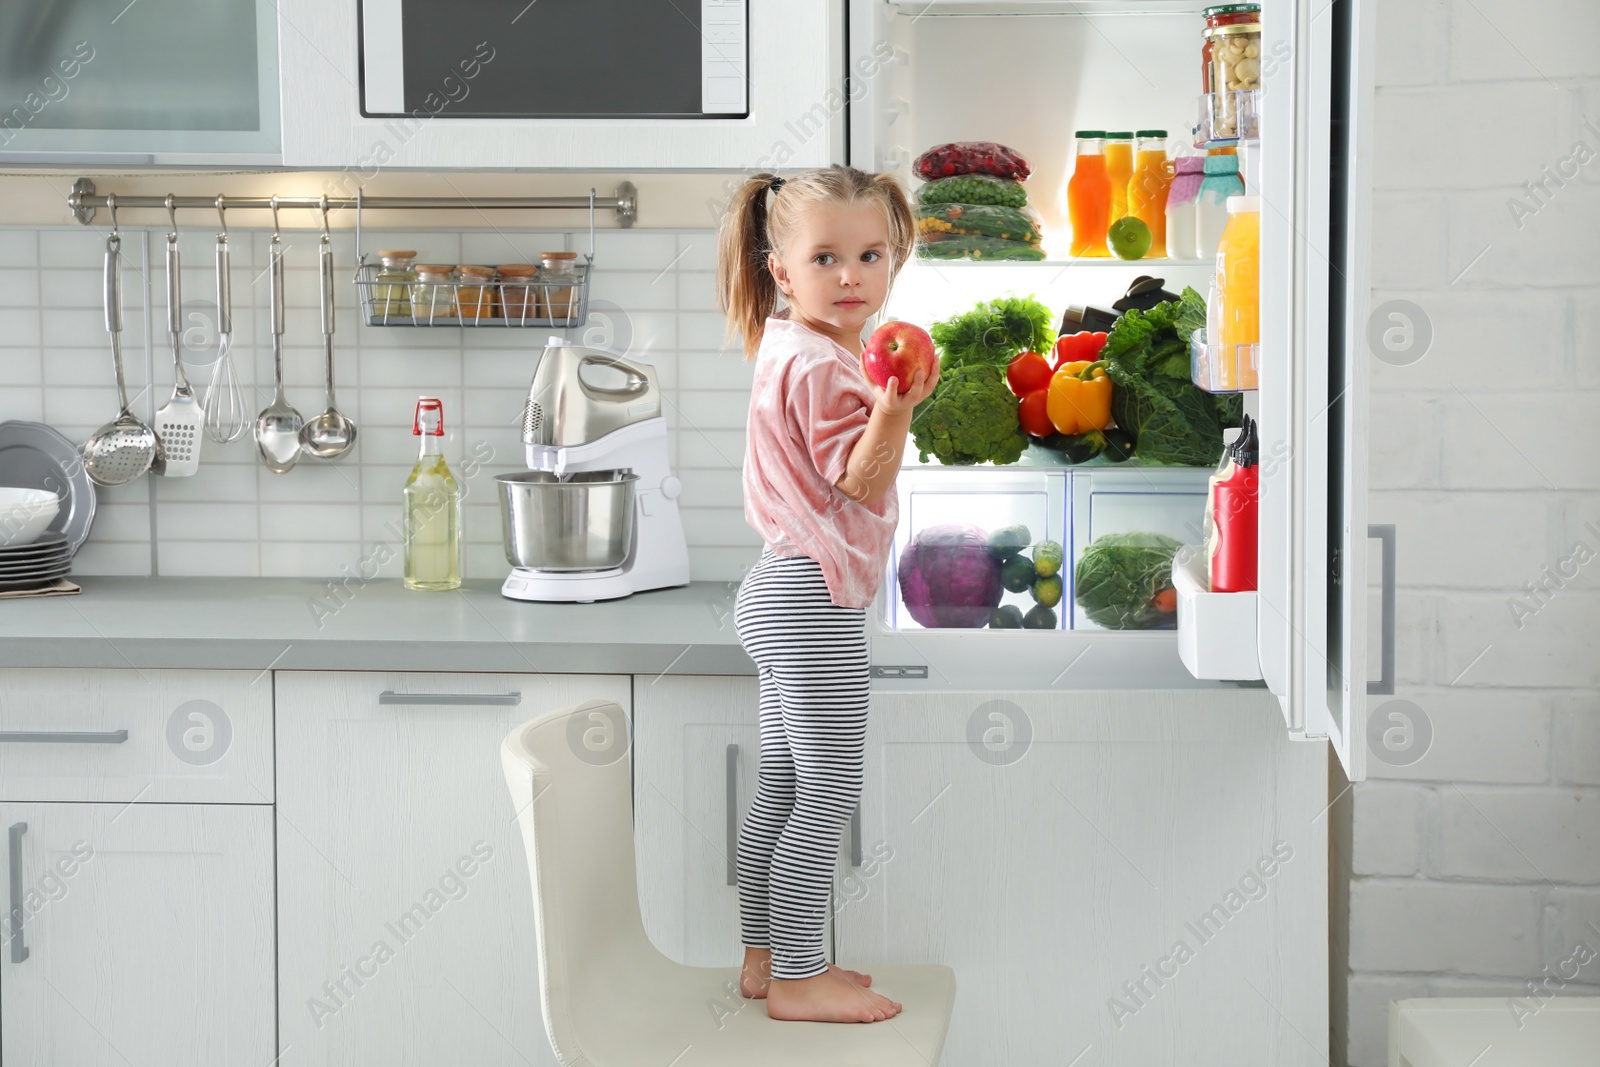 Photo of Cute girl taking apple out of refrigerator in kitchen